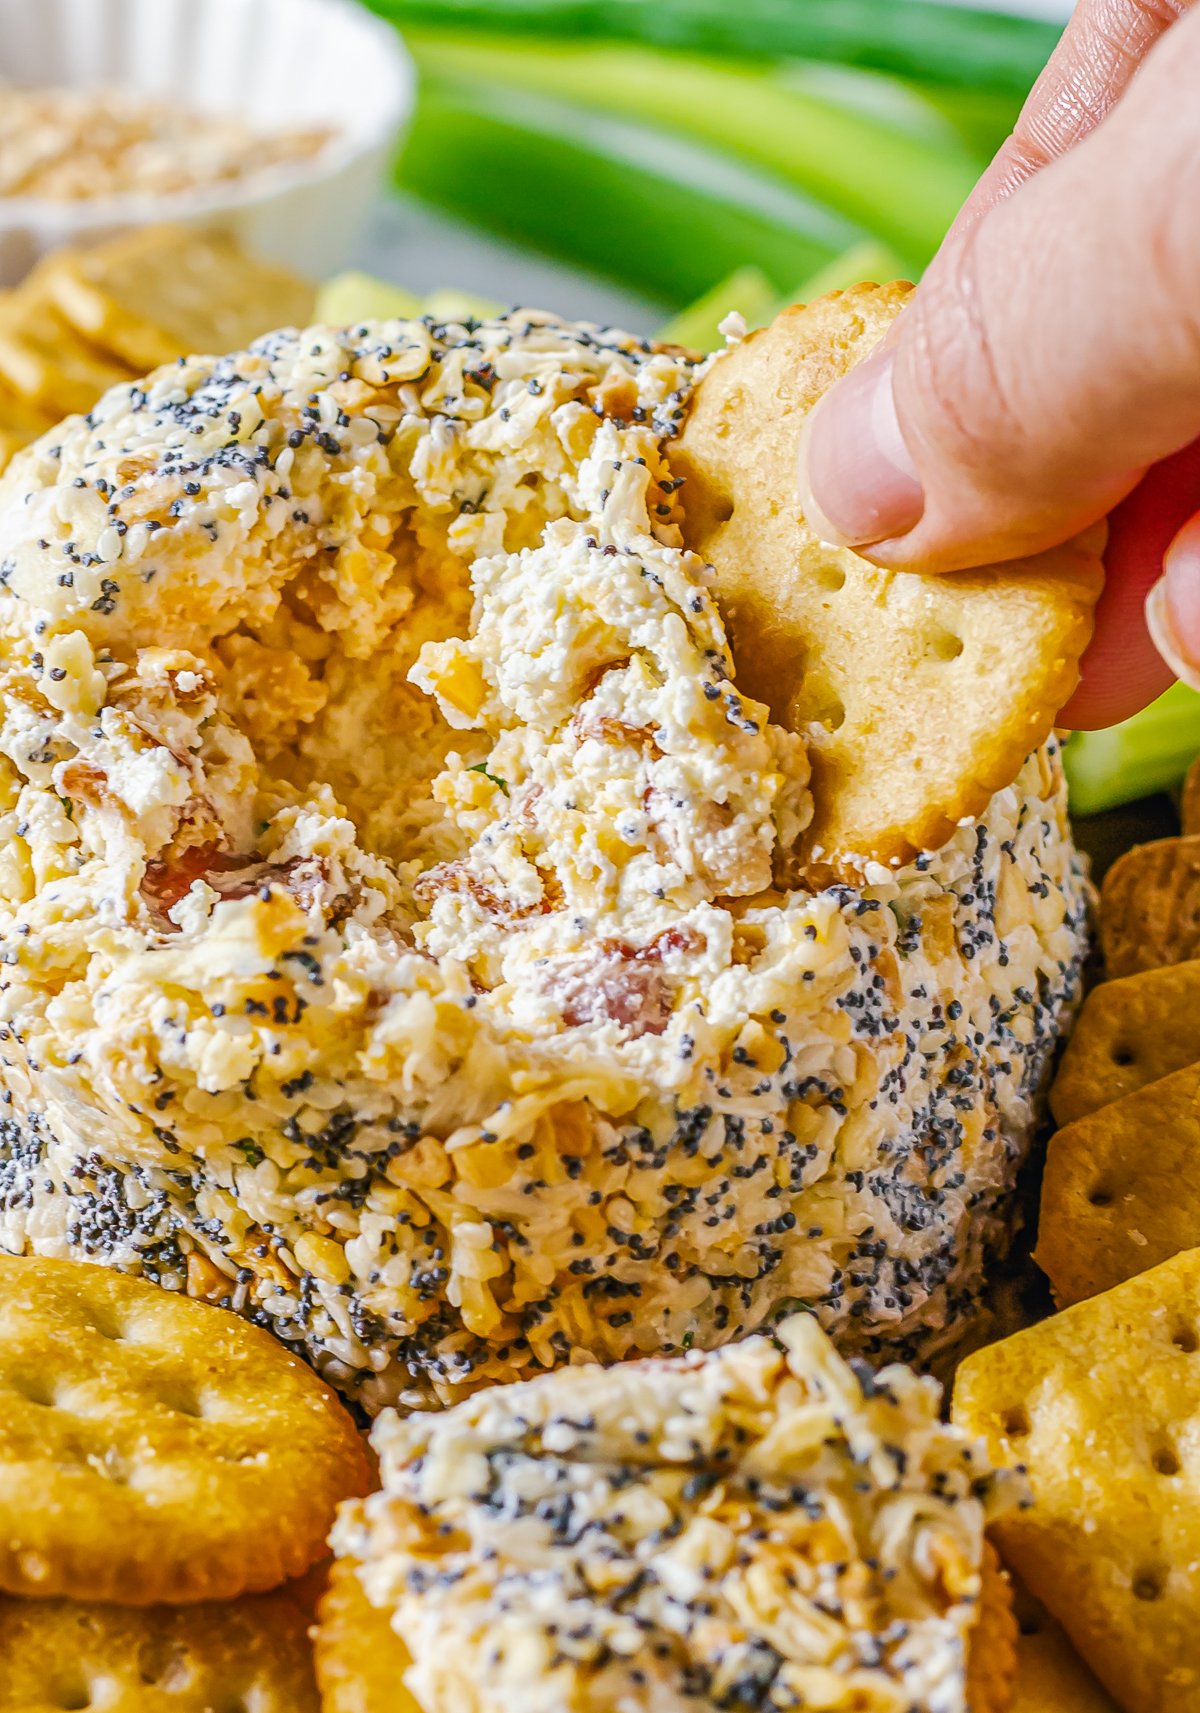 Hand dipping cracker into Everything Cheese Ball Recipe.